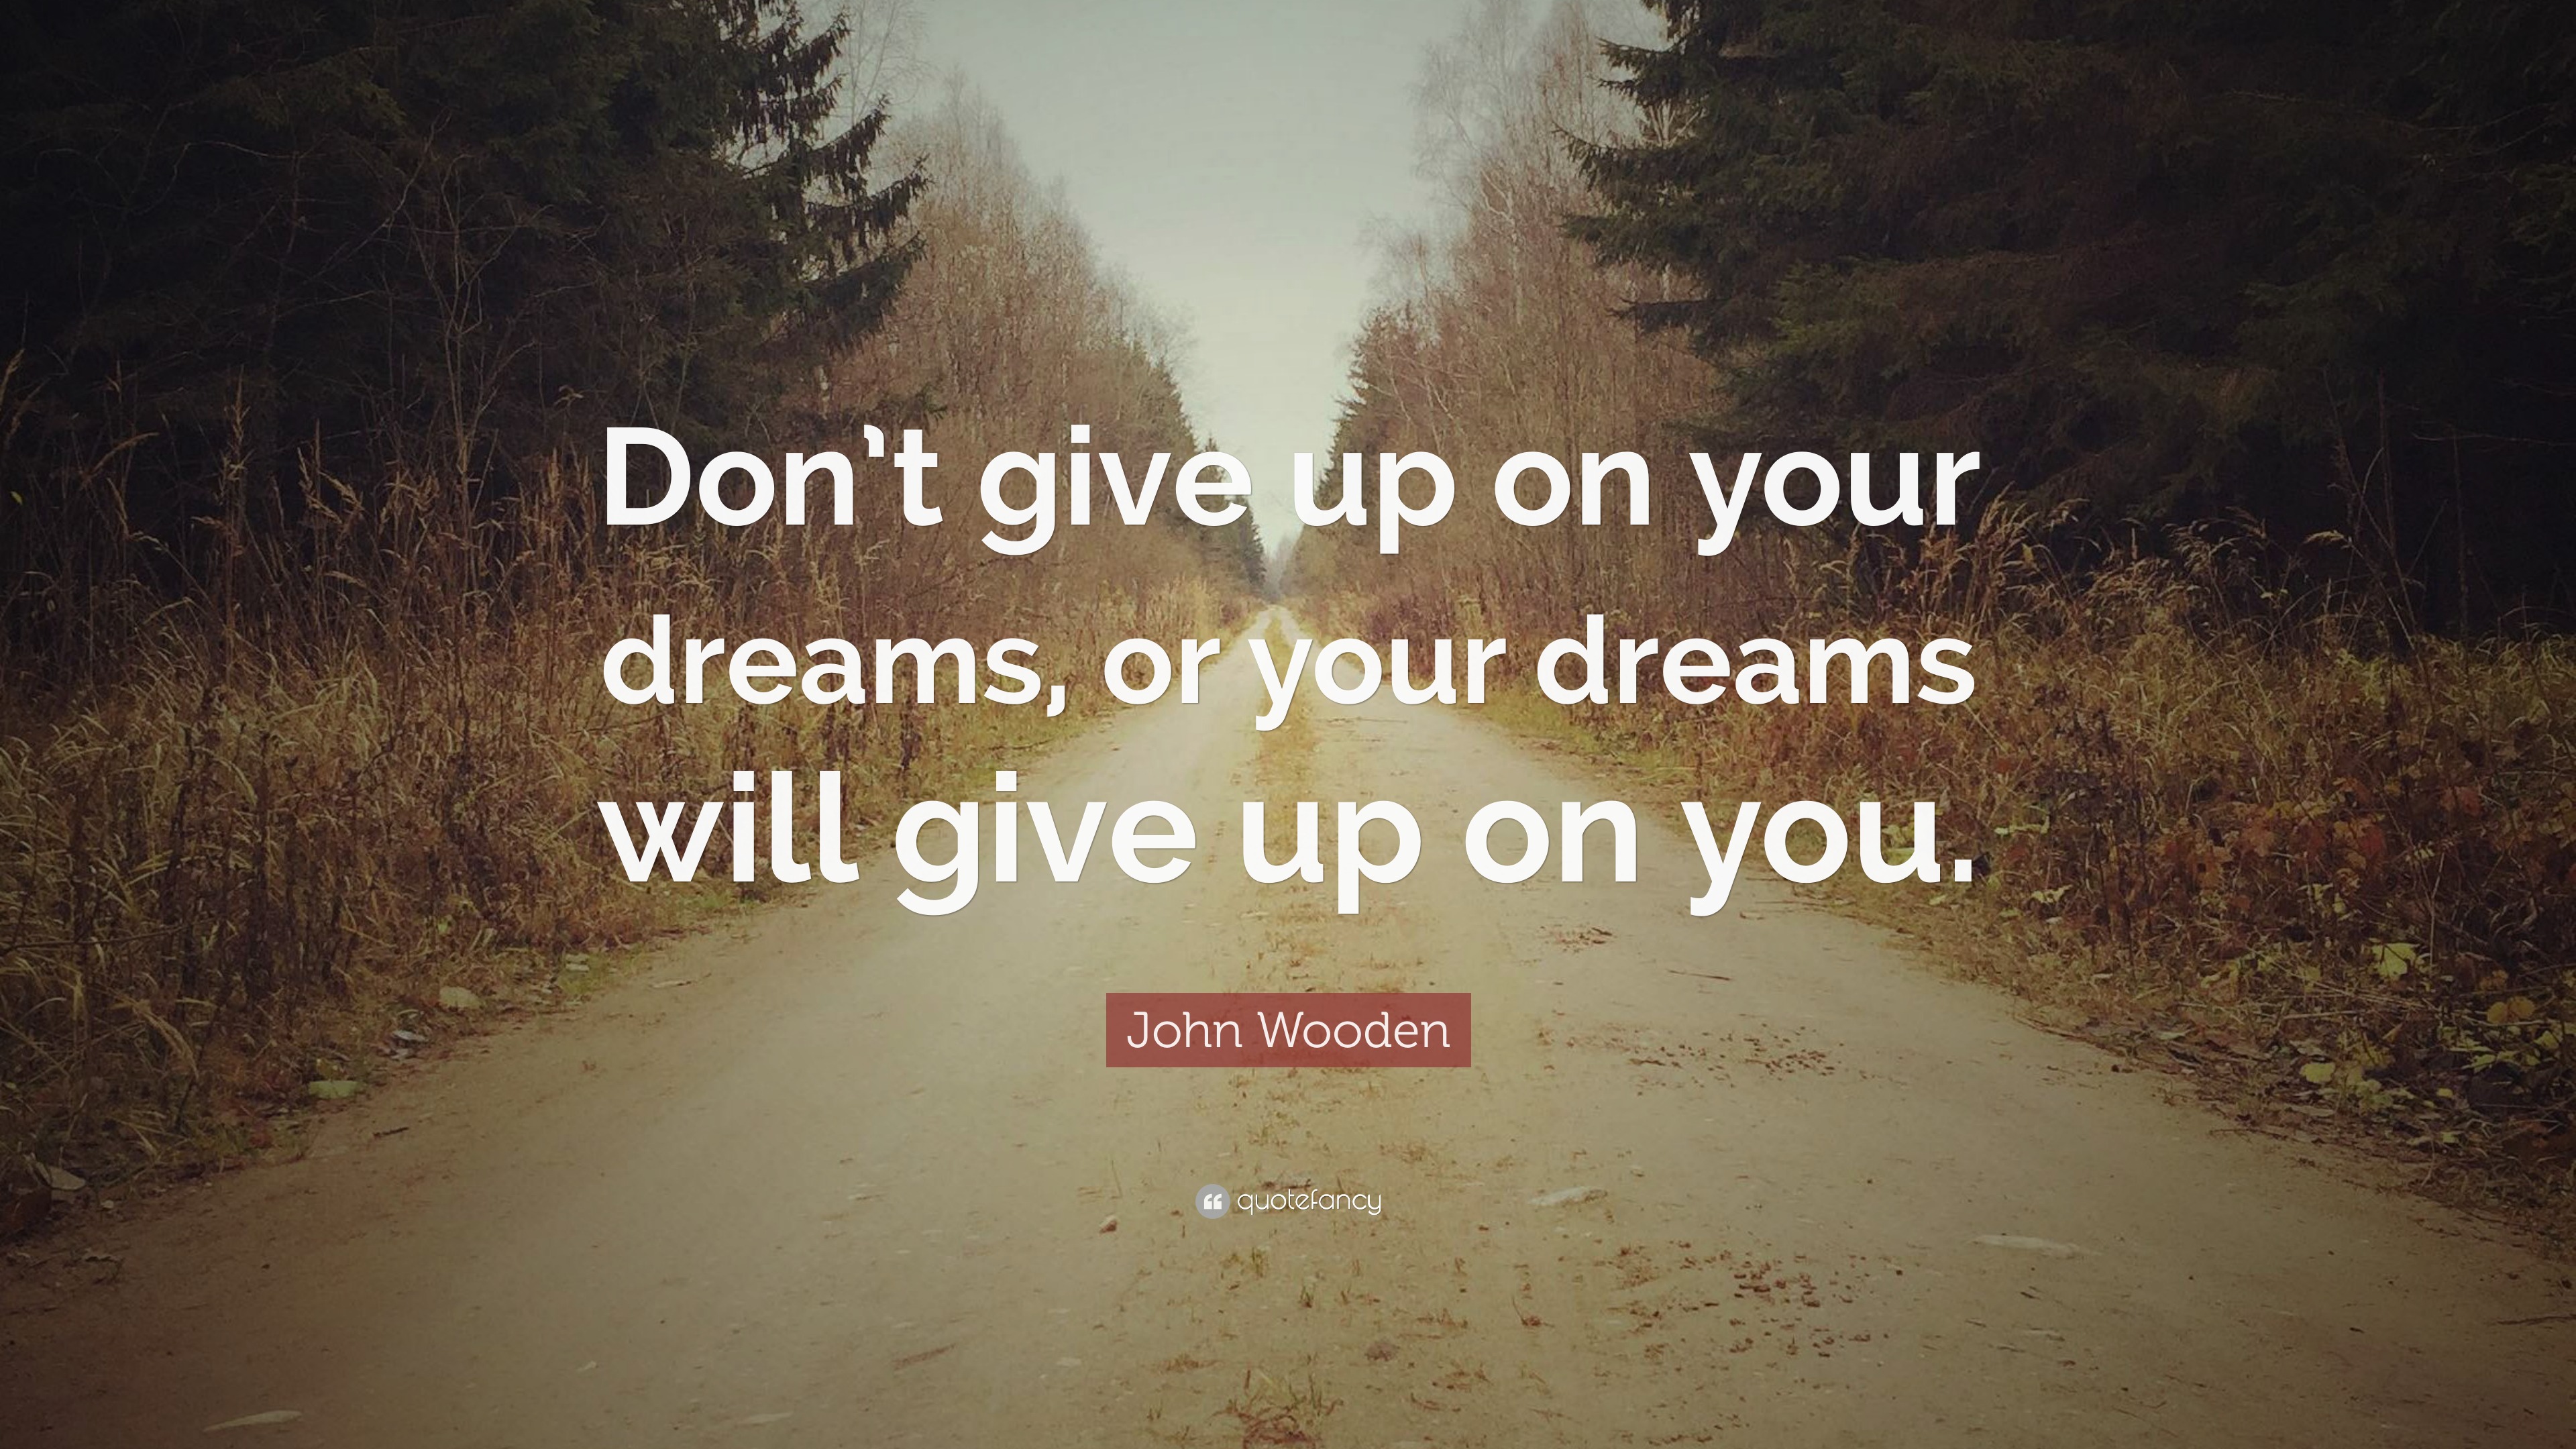 John Wooden Quote: “Don’t give up on your dreams, or your dreams will